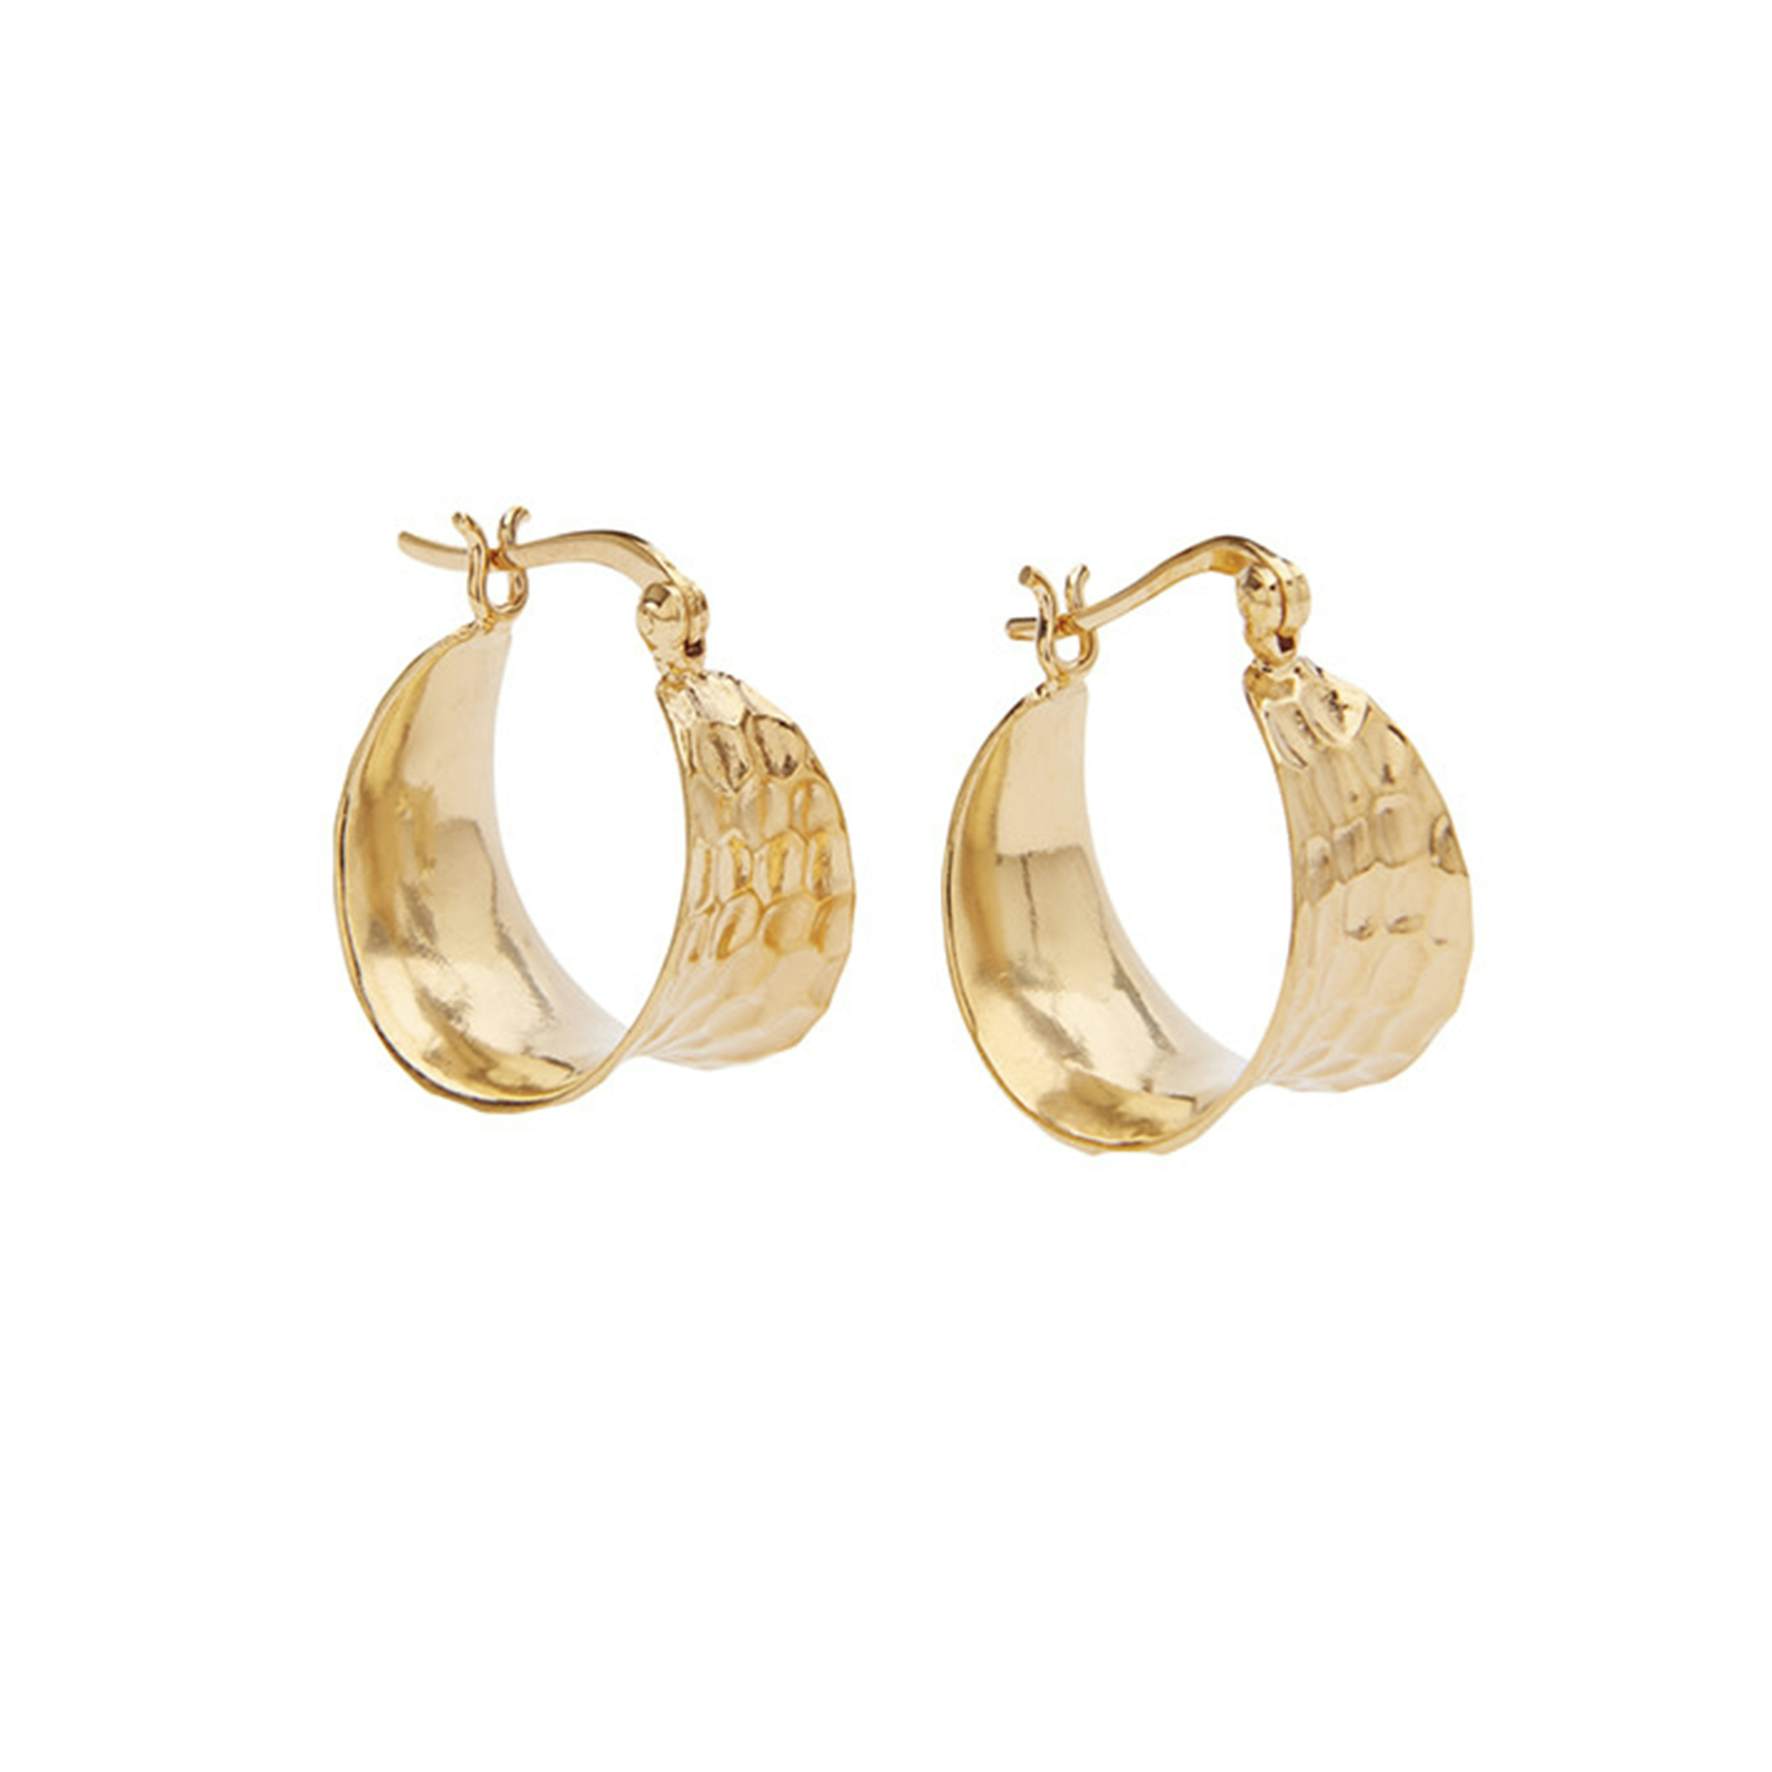 Cleo Petit Hoops from Pico in Goldplated-Silver Sterling 925